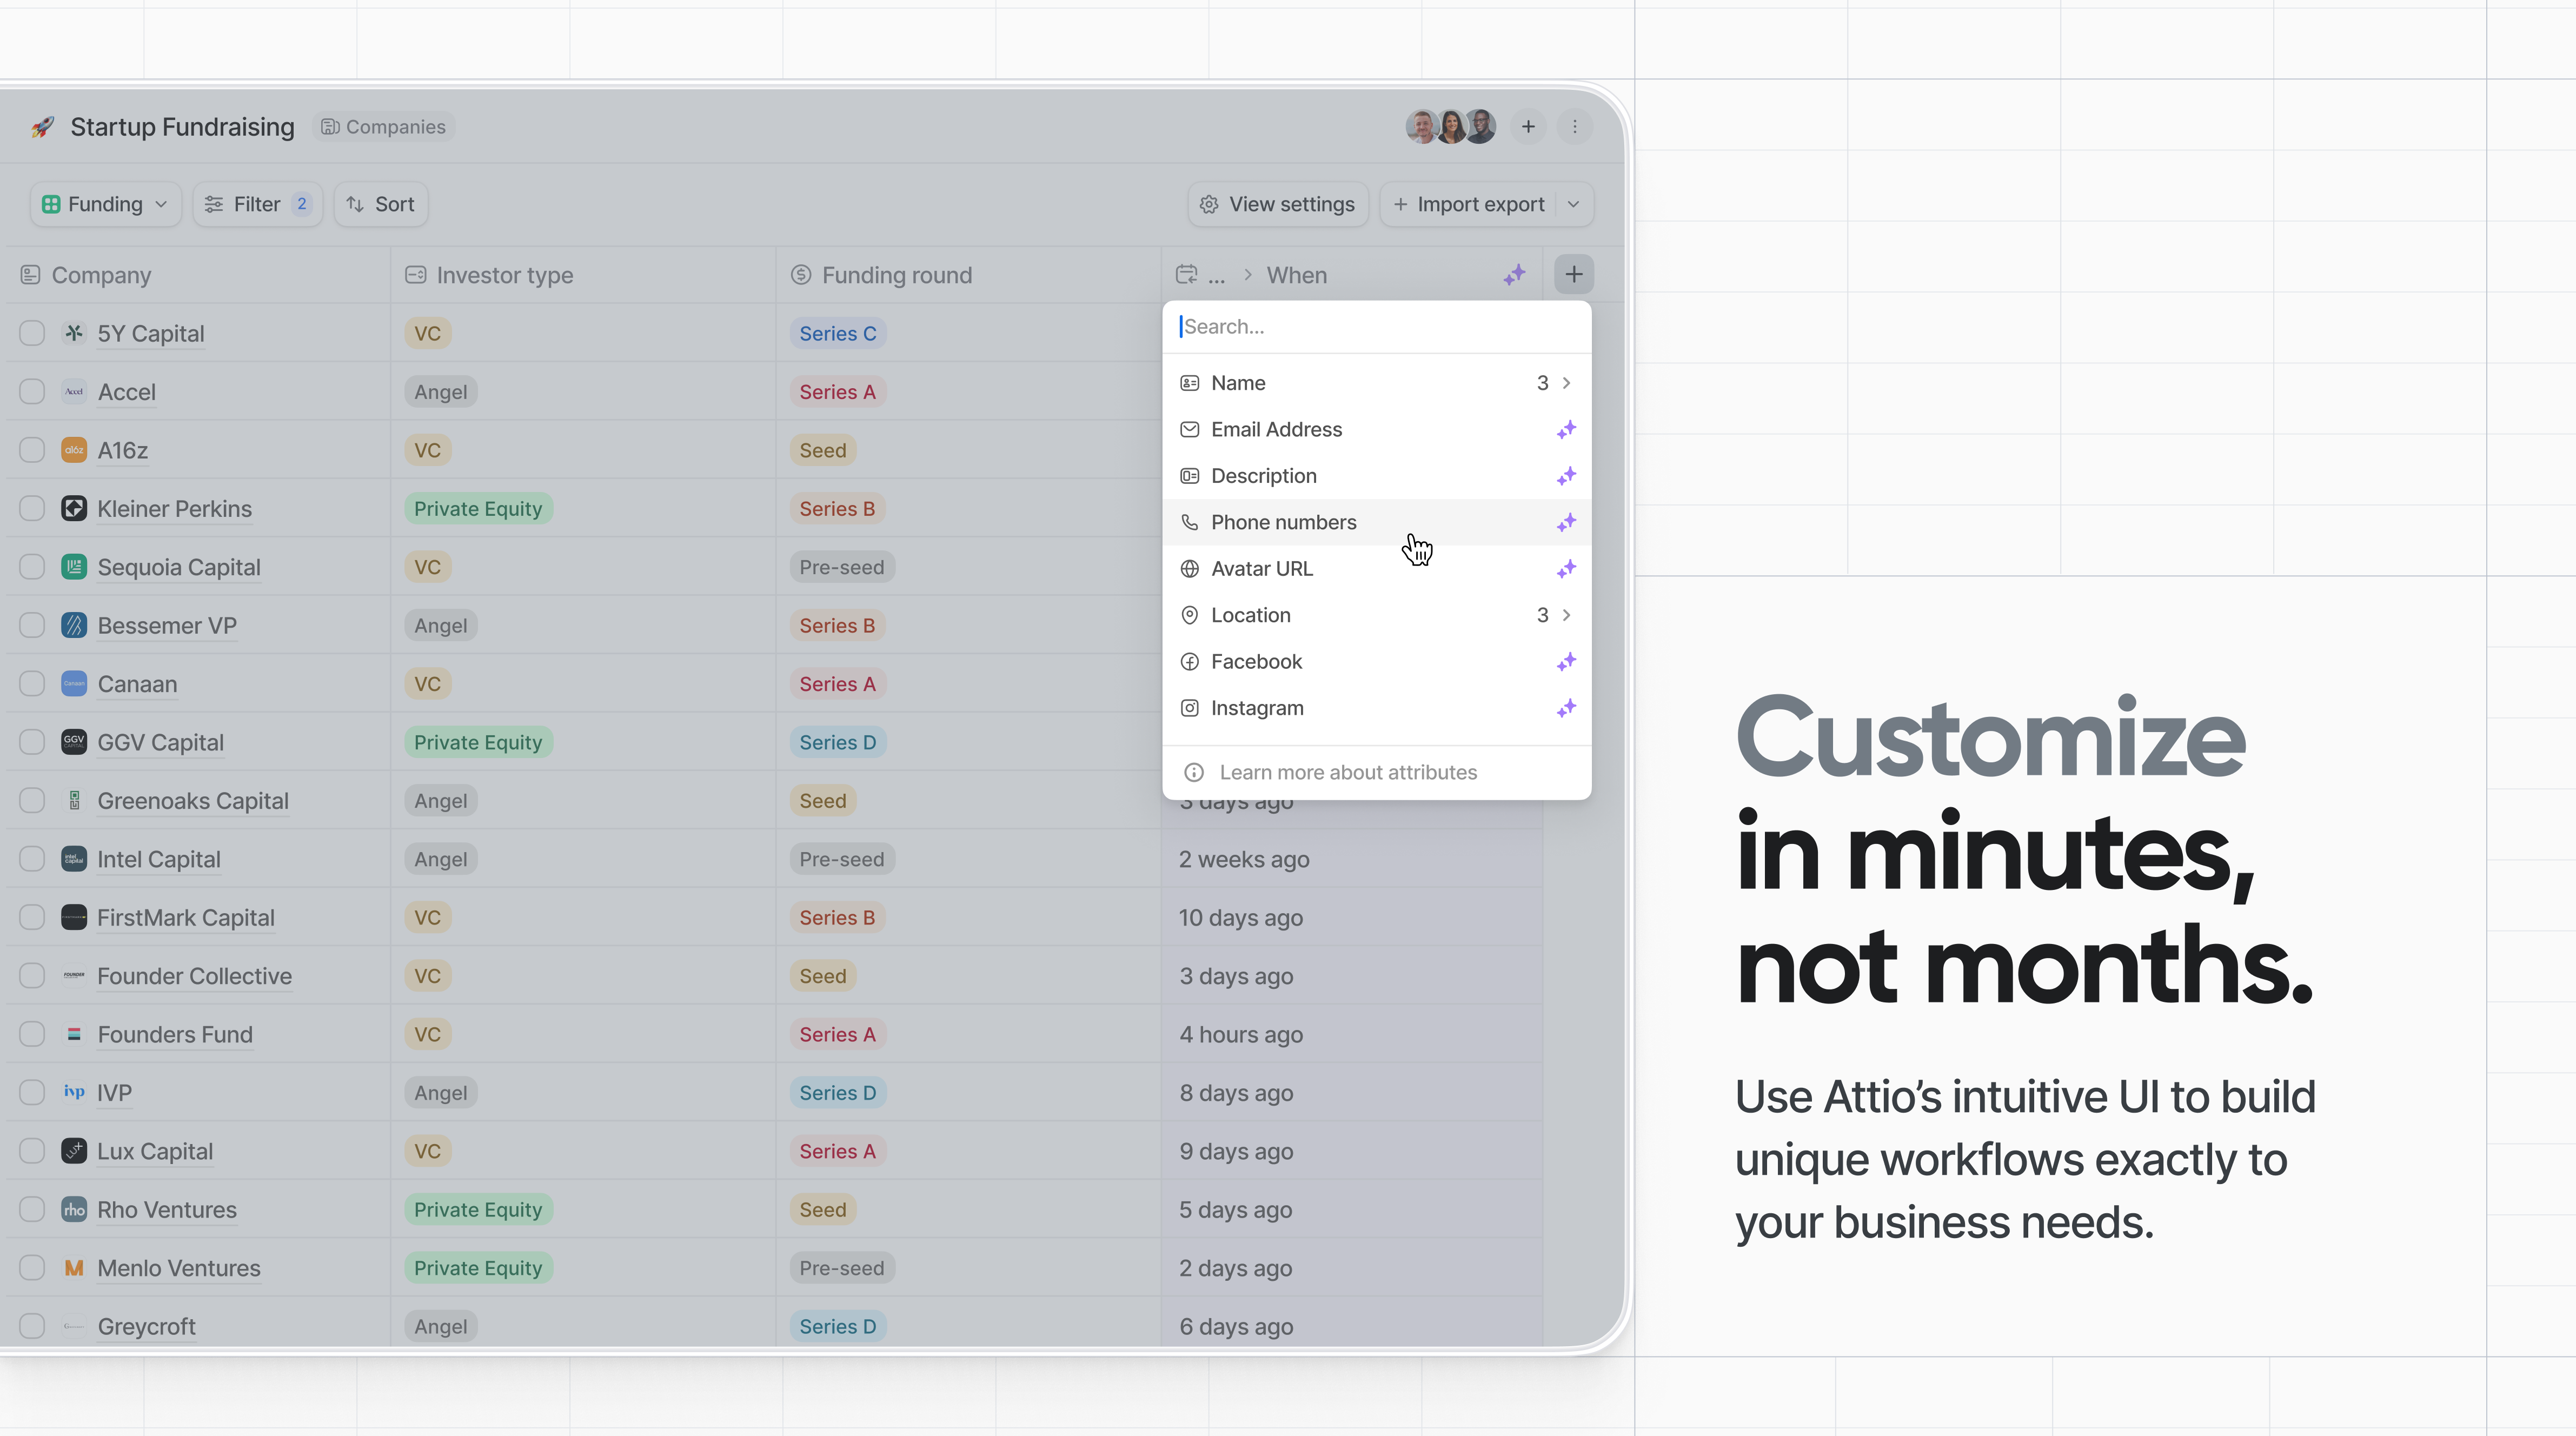 Customize  in minutes, not months: Use Attio’s intuitive UI to build unique workflows exactly to your business needs.